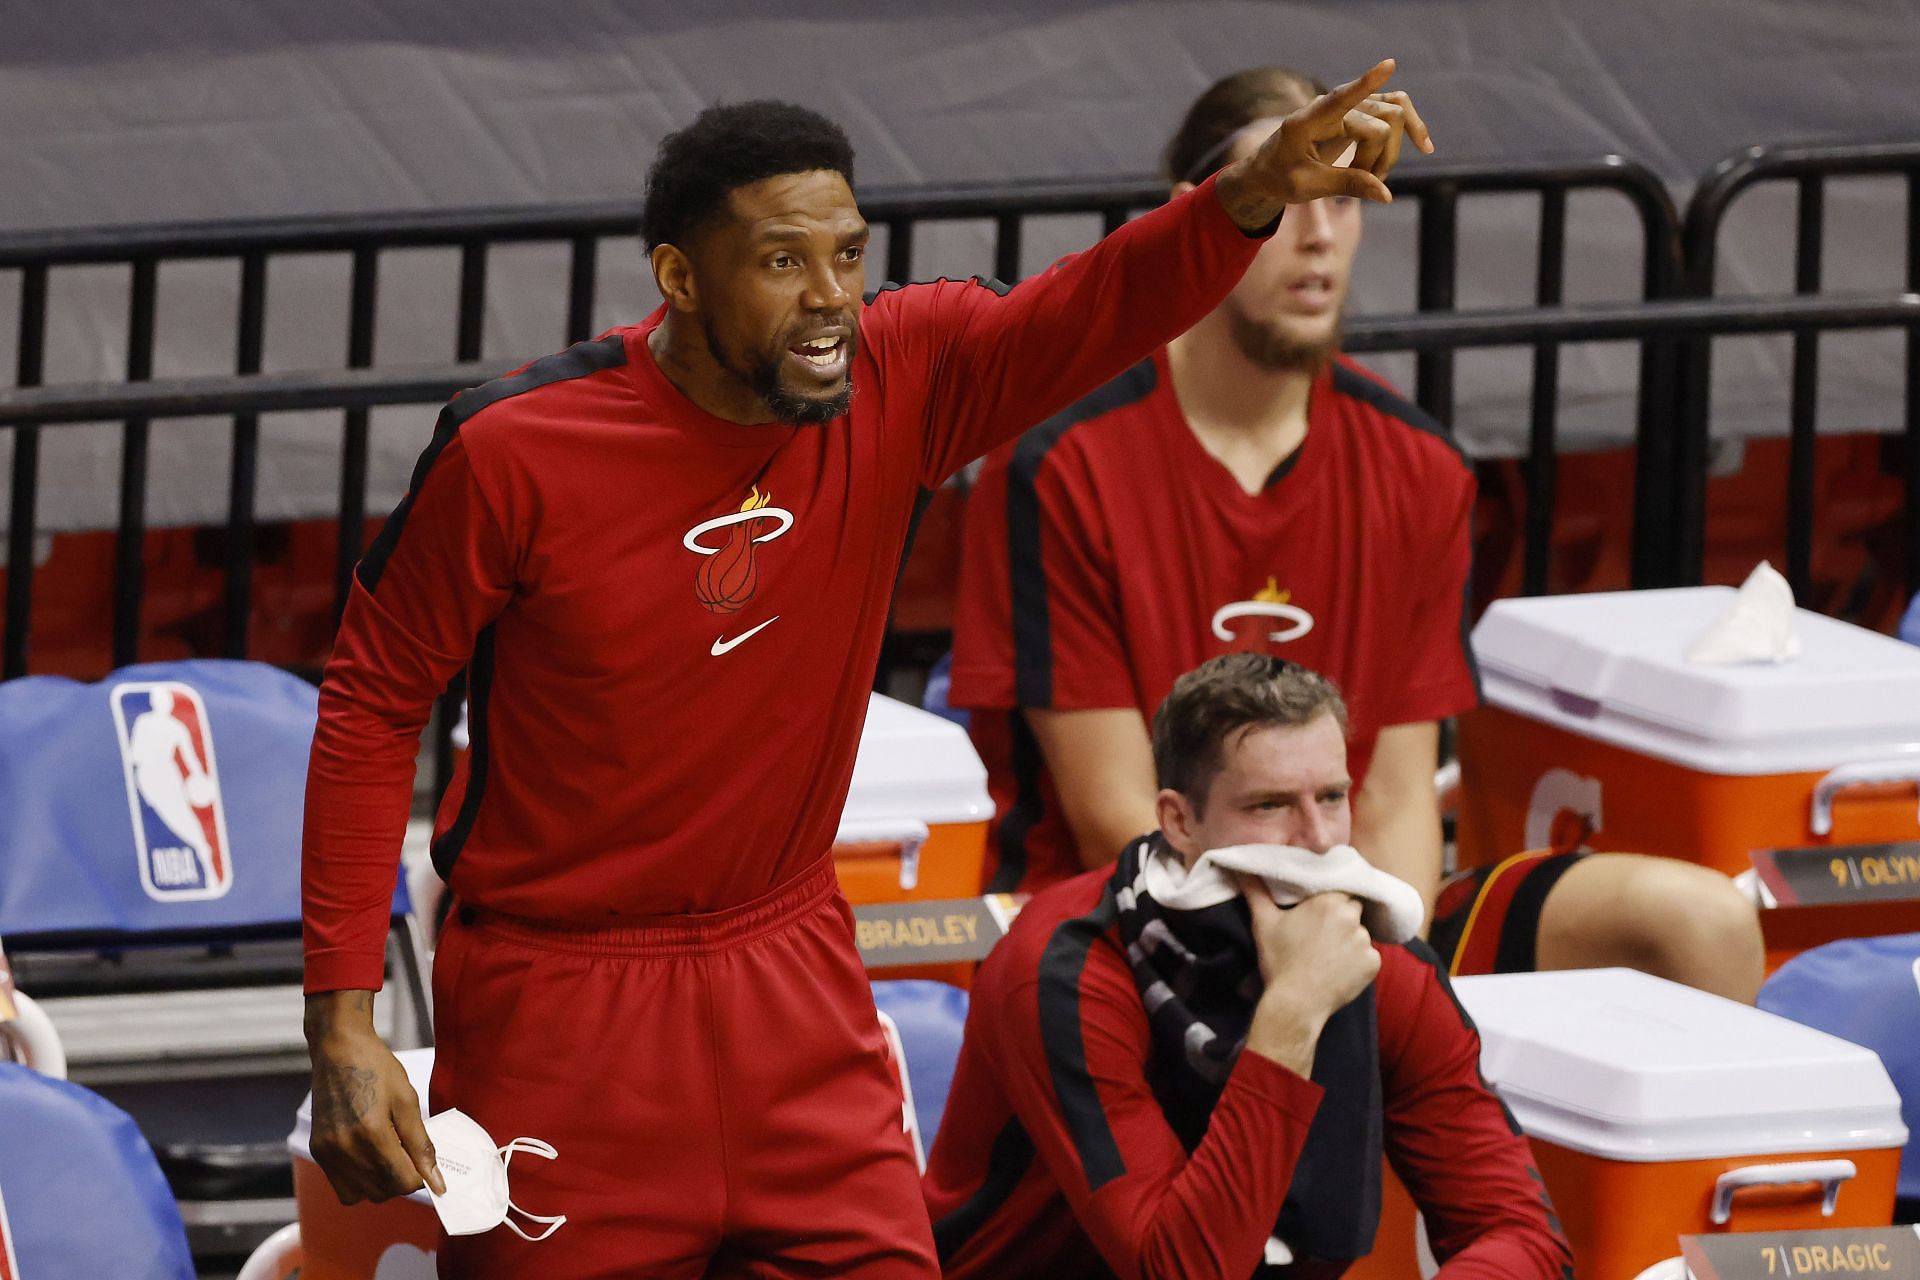 Miami Heat legend Udonis Haslem shouting out instructions from the bench